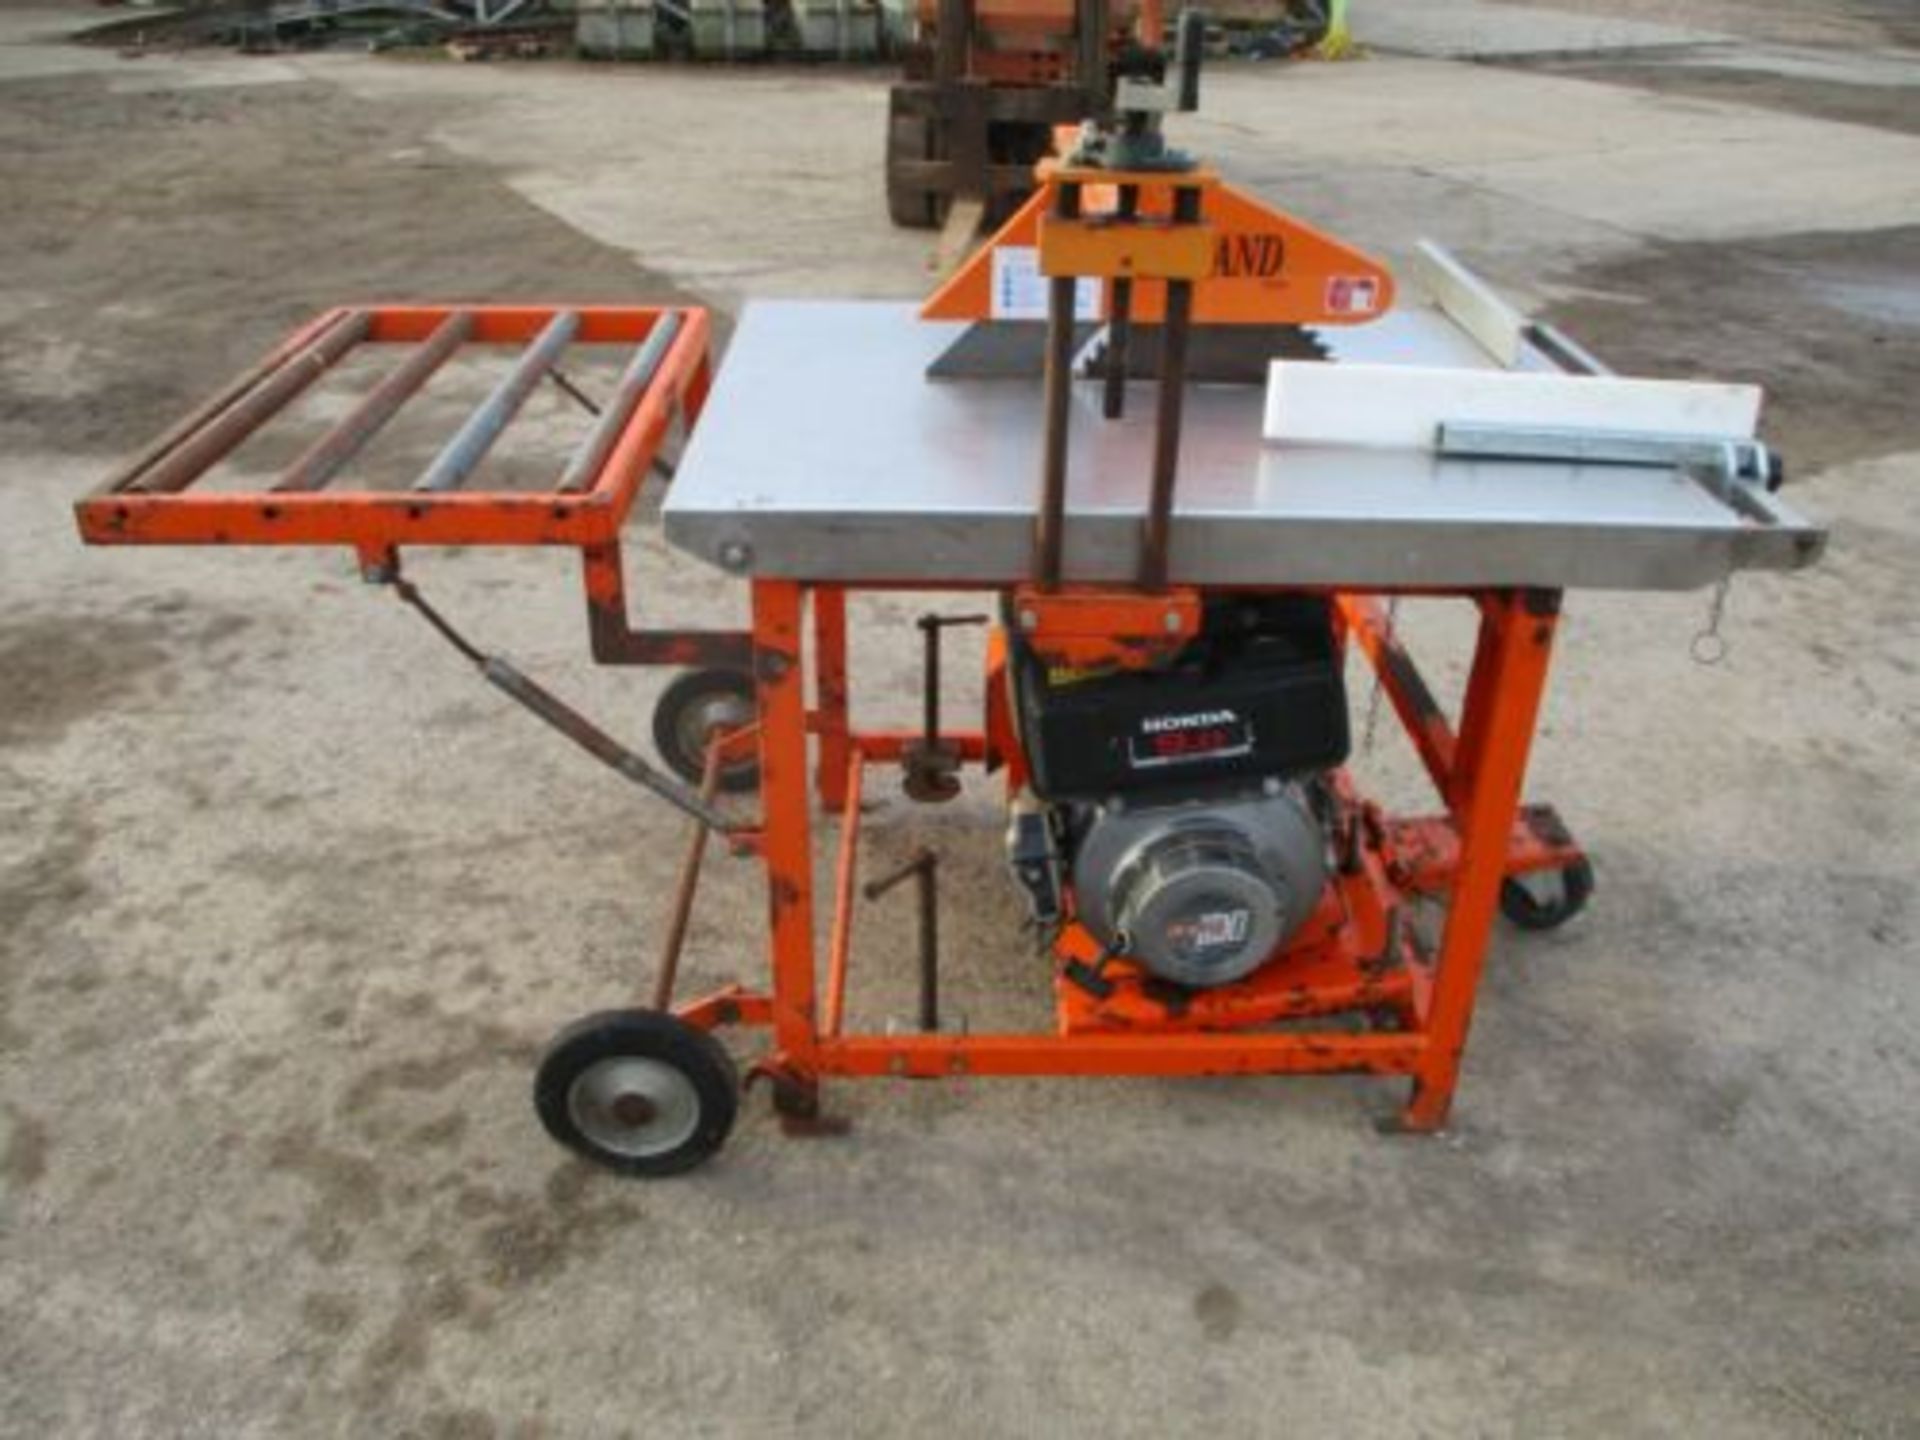 RED BAND WSA400 16" SITE WOOD SAW BENCH HONDA DIESEL ELECTRIC START DELIVERY